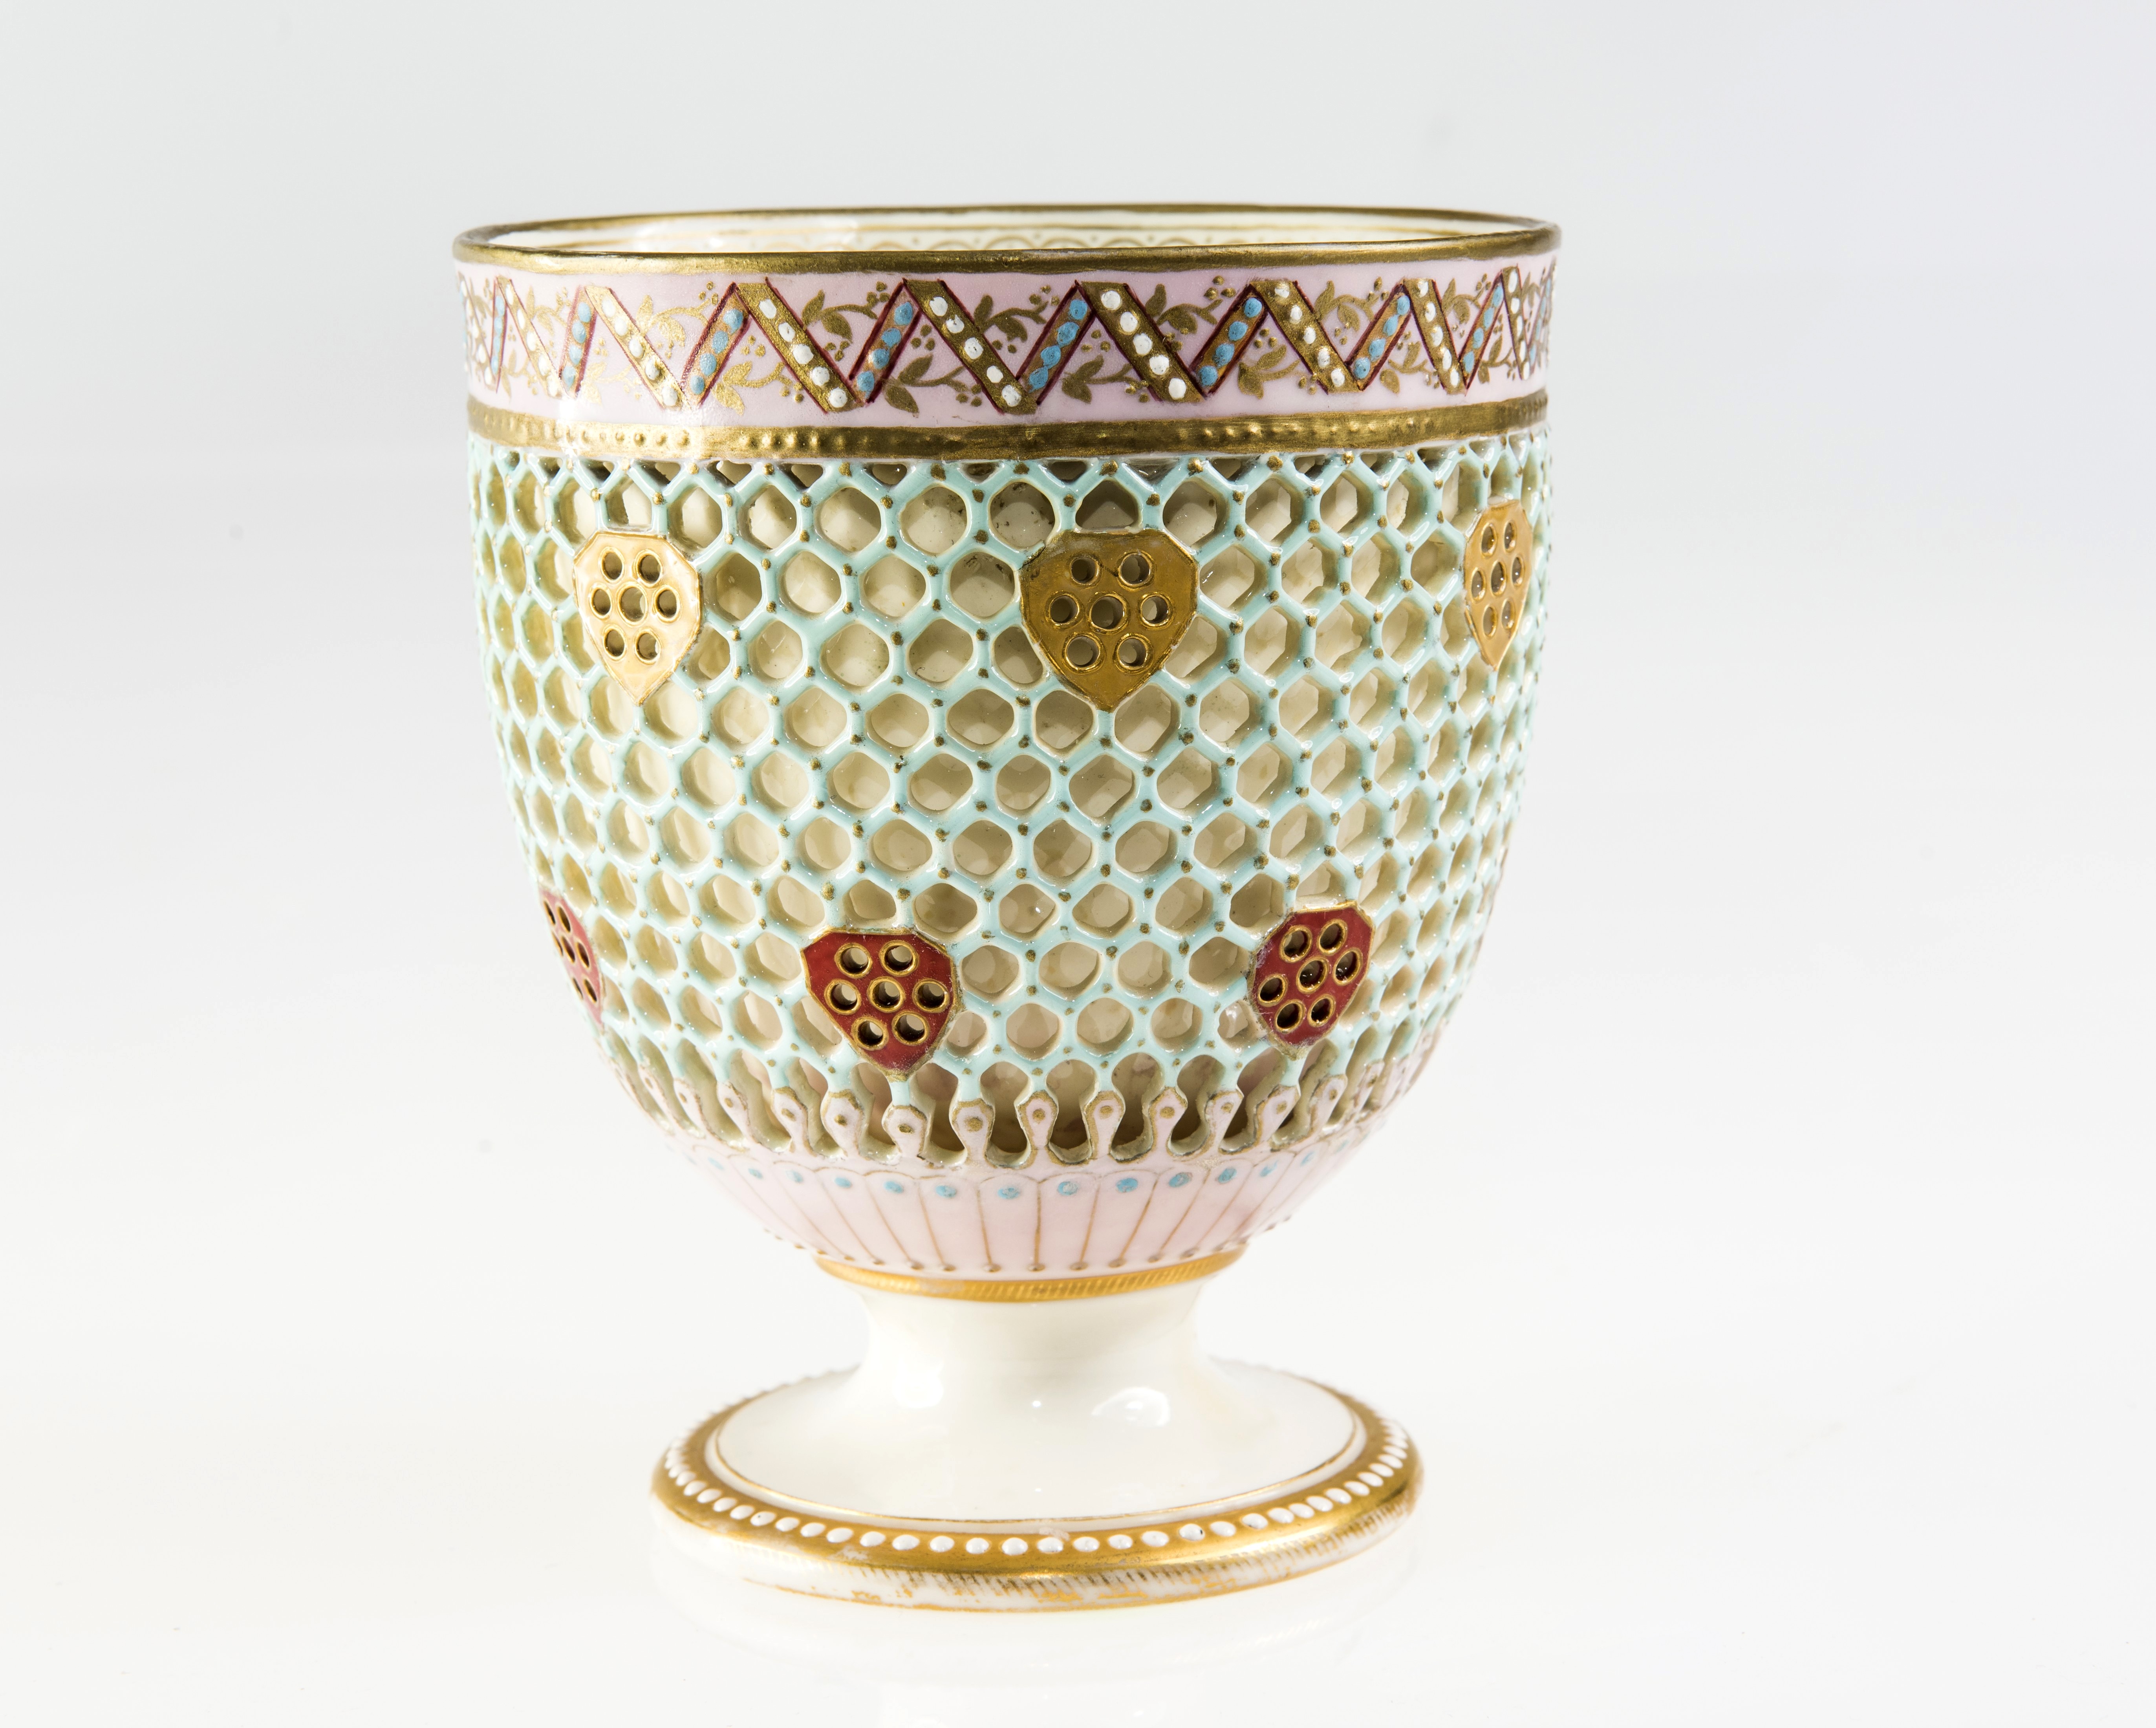 A ROYAL WORCESTER RETICULATED VASE, c.1880, designed by George Owen, of pedestal cup form, double